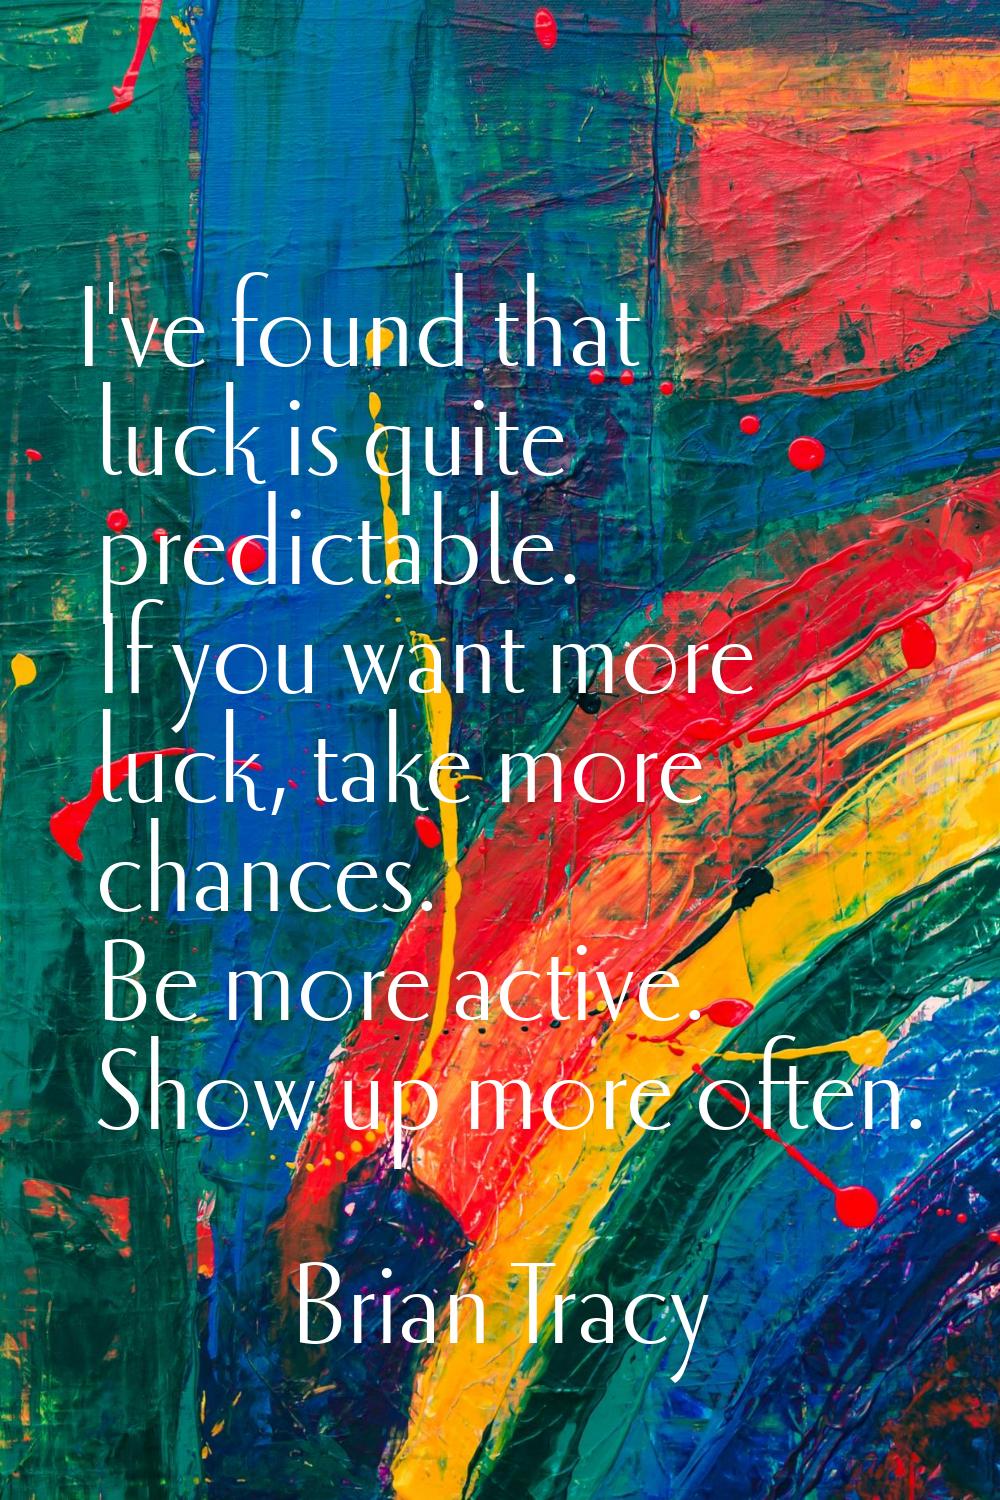 I've found that luck is quite predictable. If you want more luck, take more chances. Be more active